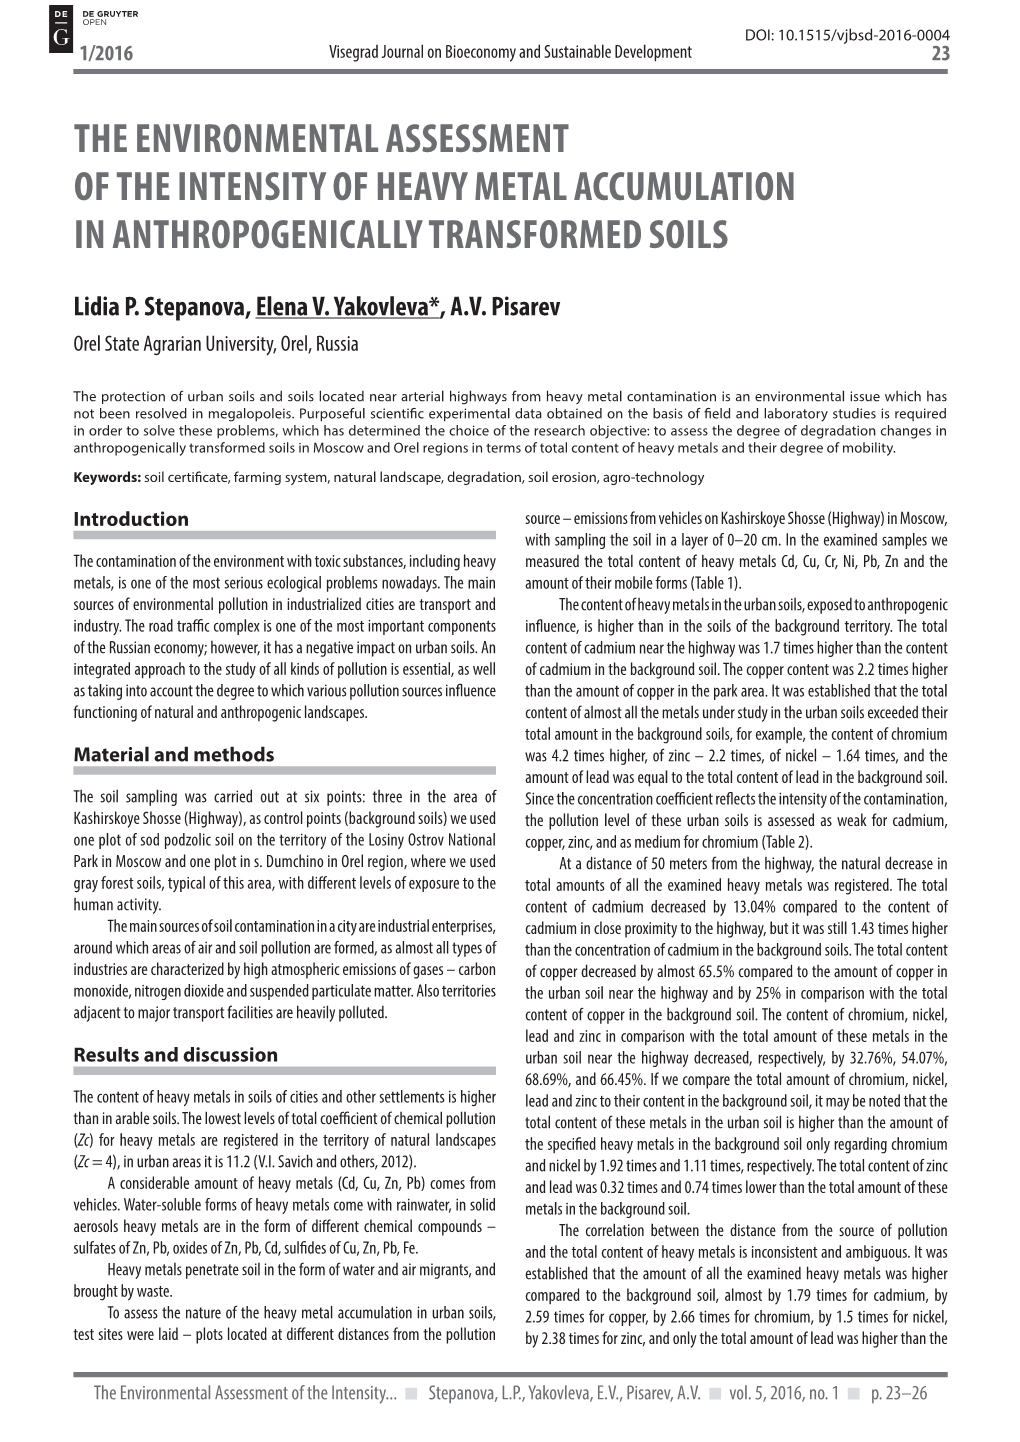 The Environmental Assessment of the Intensity of Heavy Metal Accumulation in Anthropogenically Transformed Soils